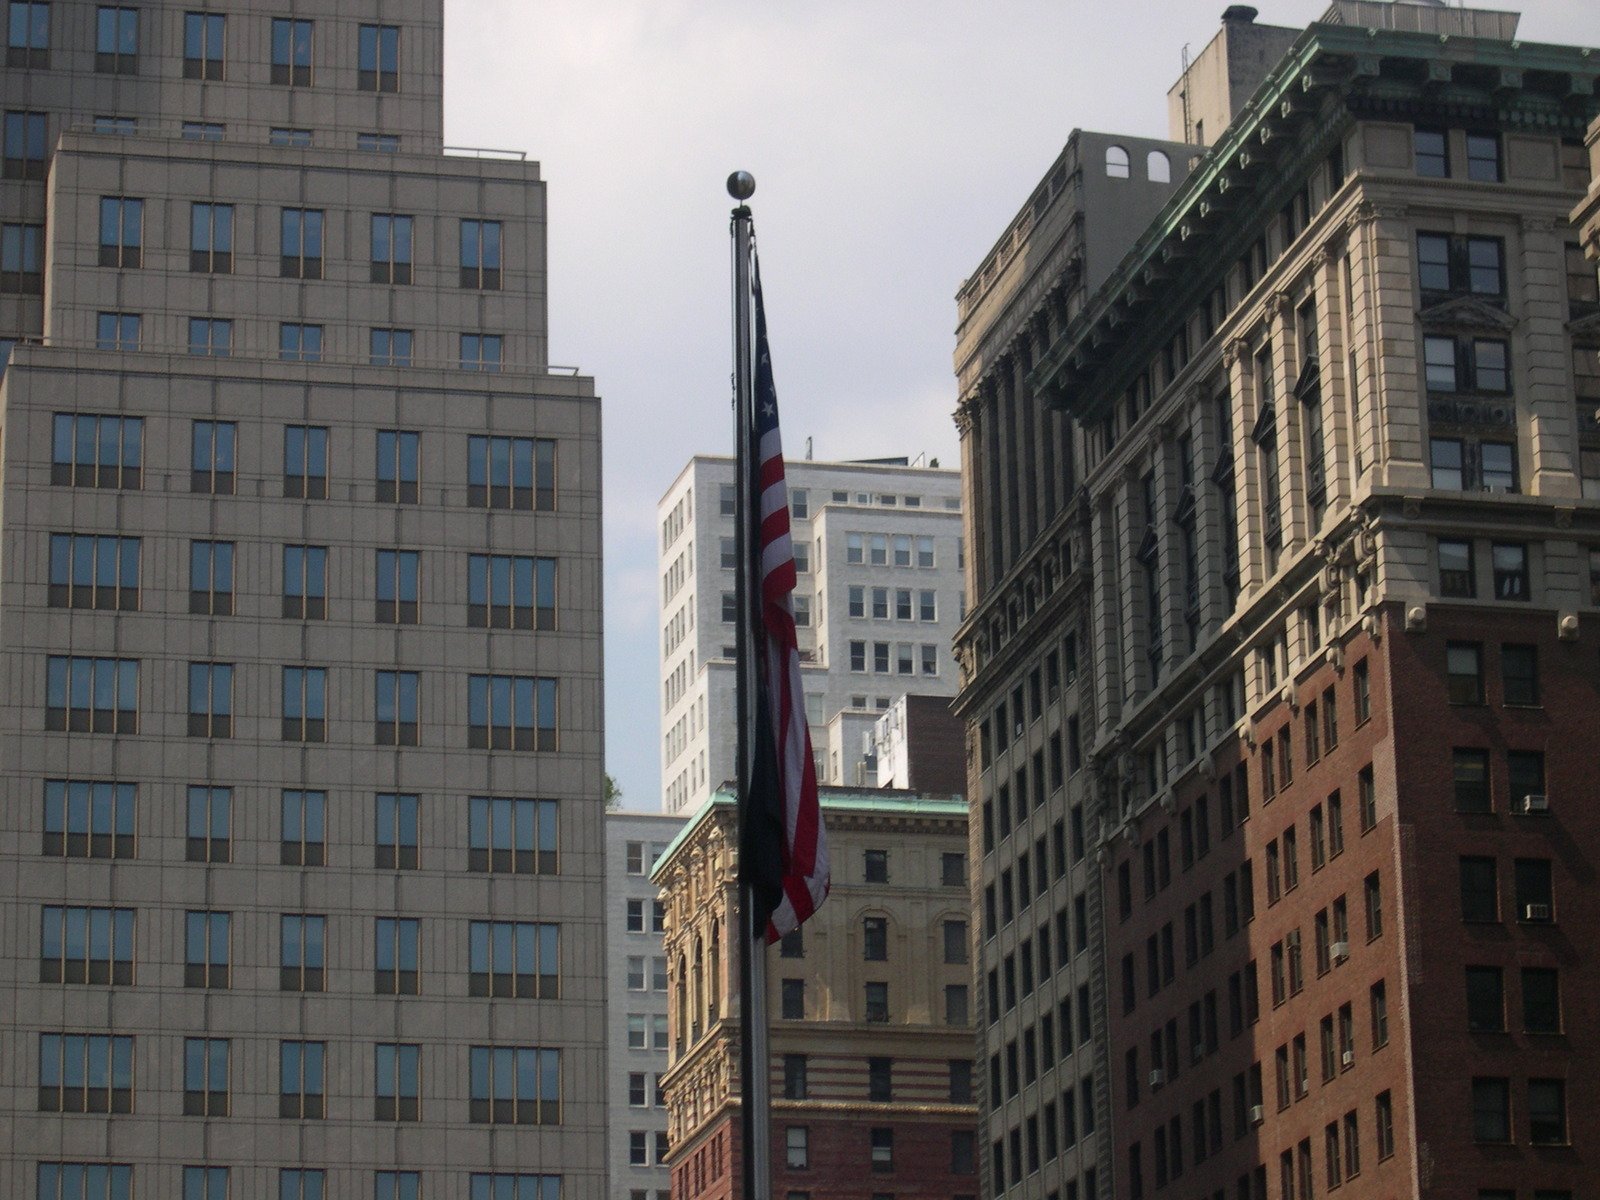 there is a large american flag flying high in the city